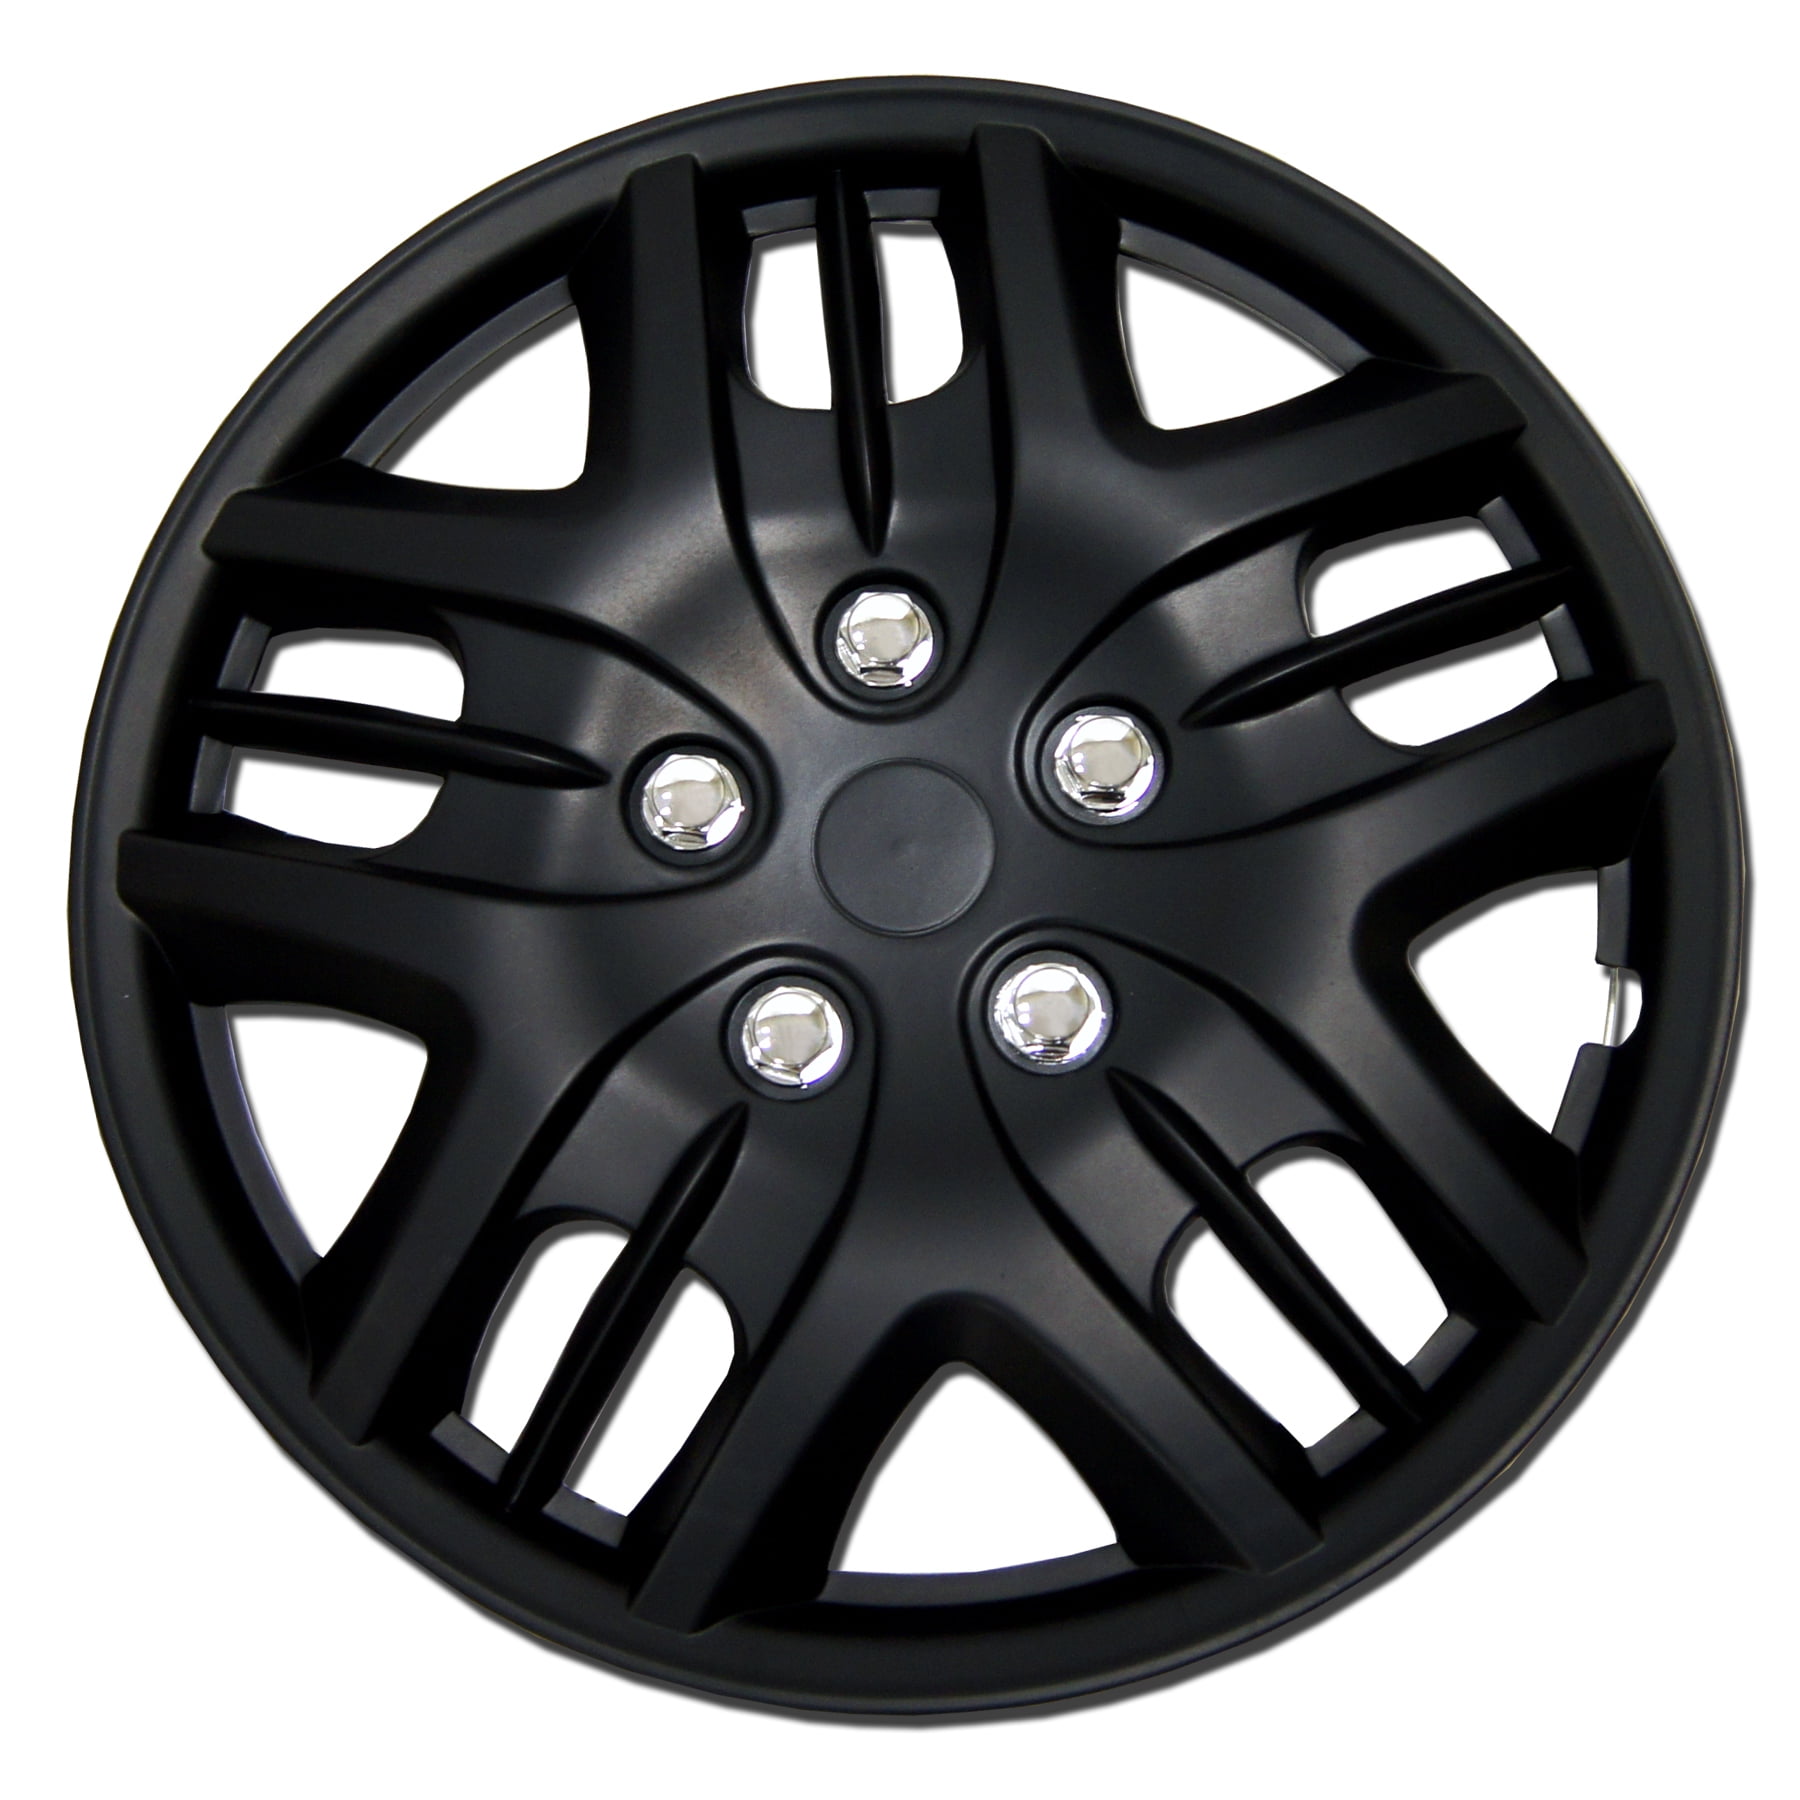 TuningPros WC-16-611-B 16-Inches Pop On Type Improved Hubcaps Wheel Skin Cover Matte Black Set of 4 